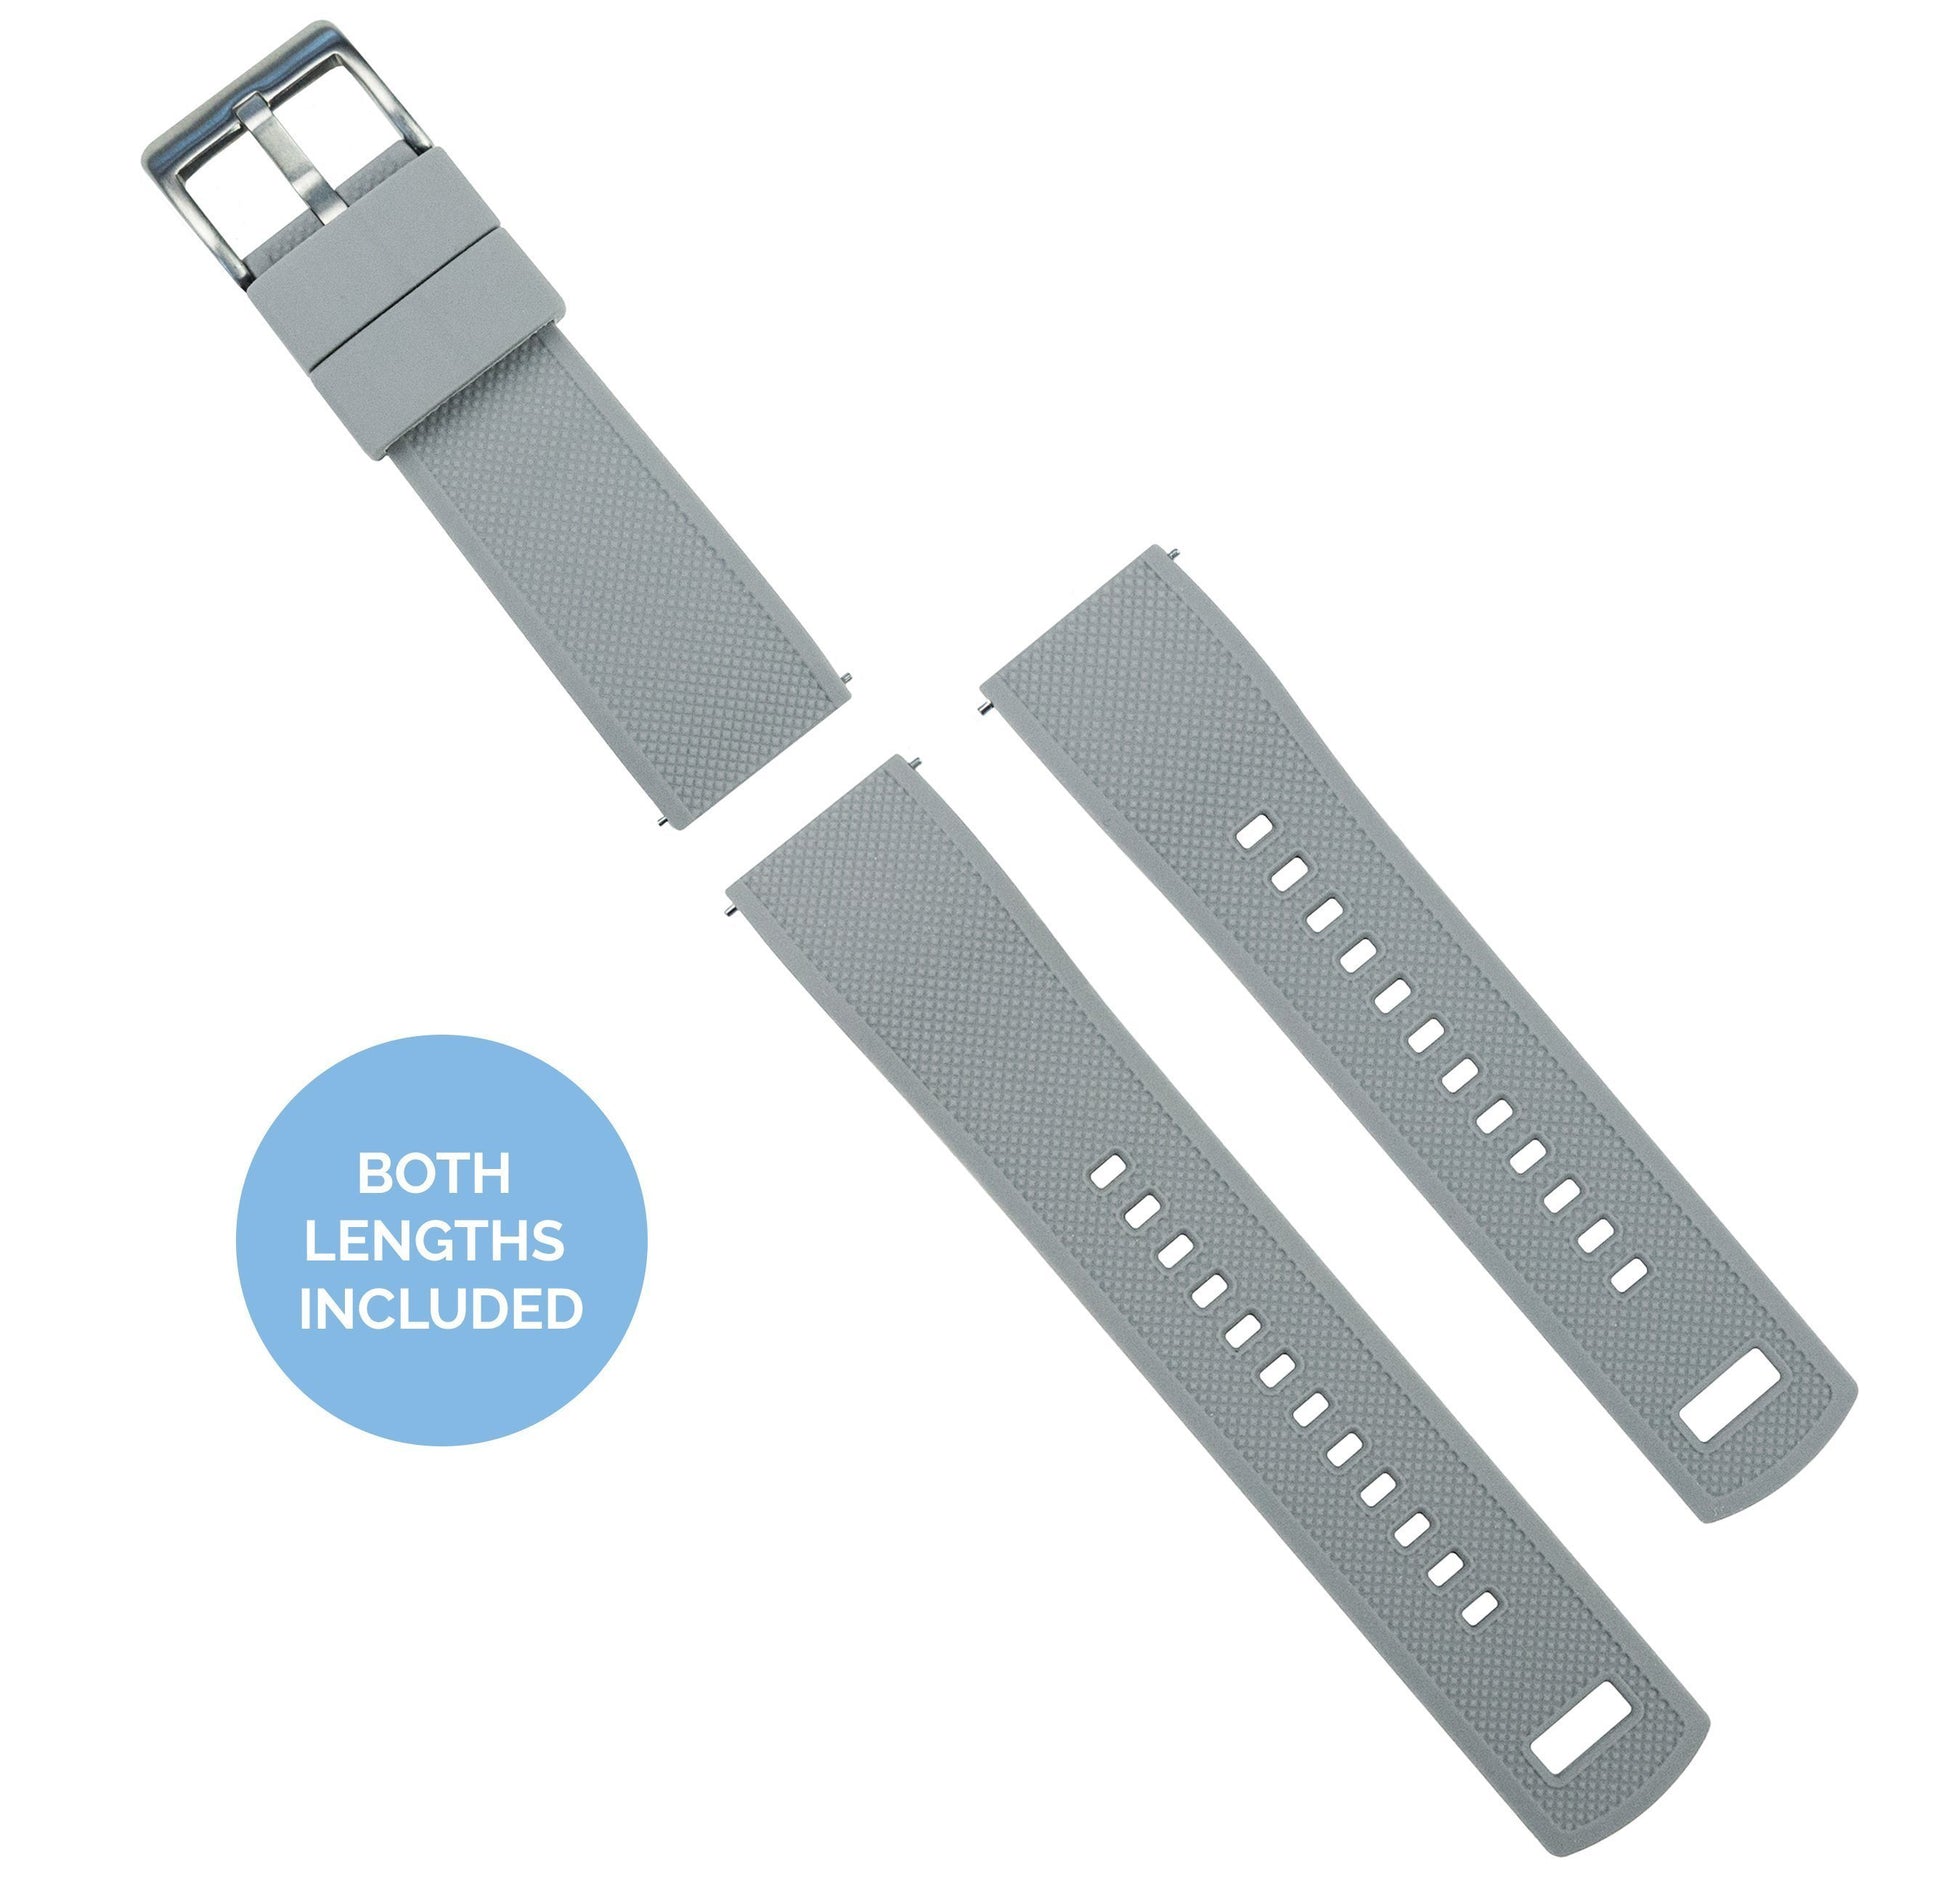 Pebble Smart Watches | Elite Silicone | Cool Grey Top / Black Bottom - Barton Watch Bands